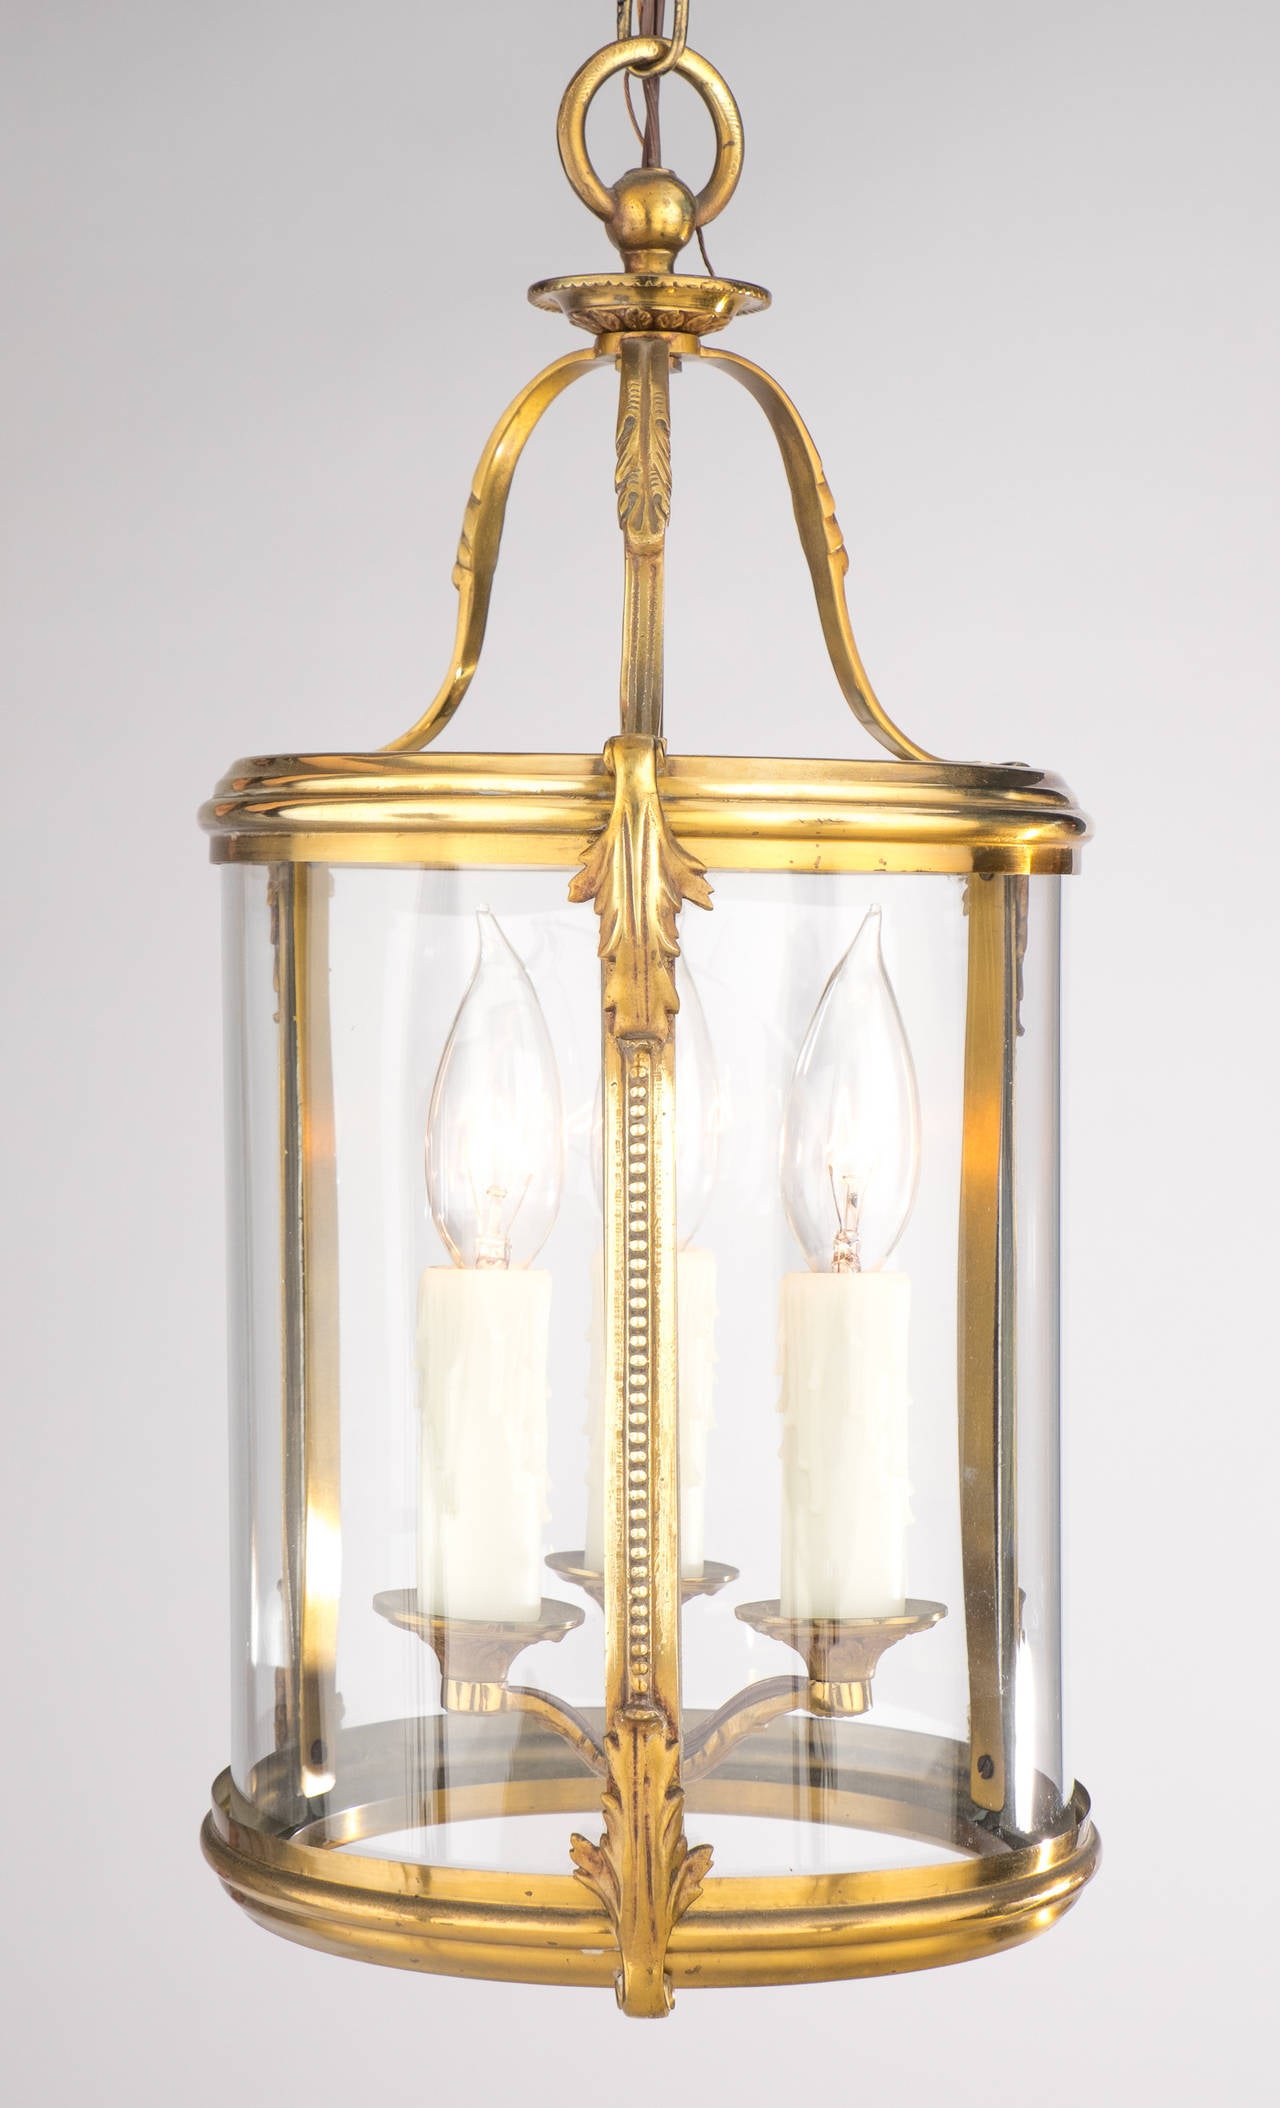 French 1920s pair of lanterns in finely cast brass and glass, with details of acanthus leaves and beading on the sides, each electrified with a three candelabrum cluster. Each fixture holds three candelabra base bulbs, rewired for the US. The height